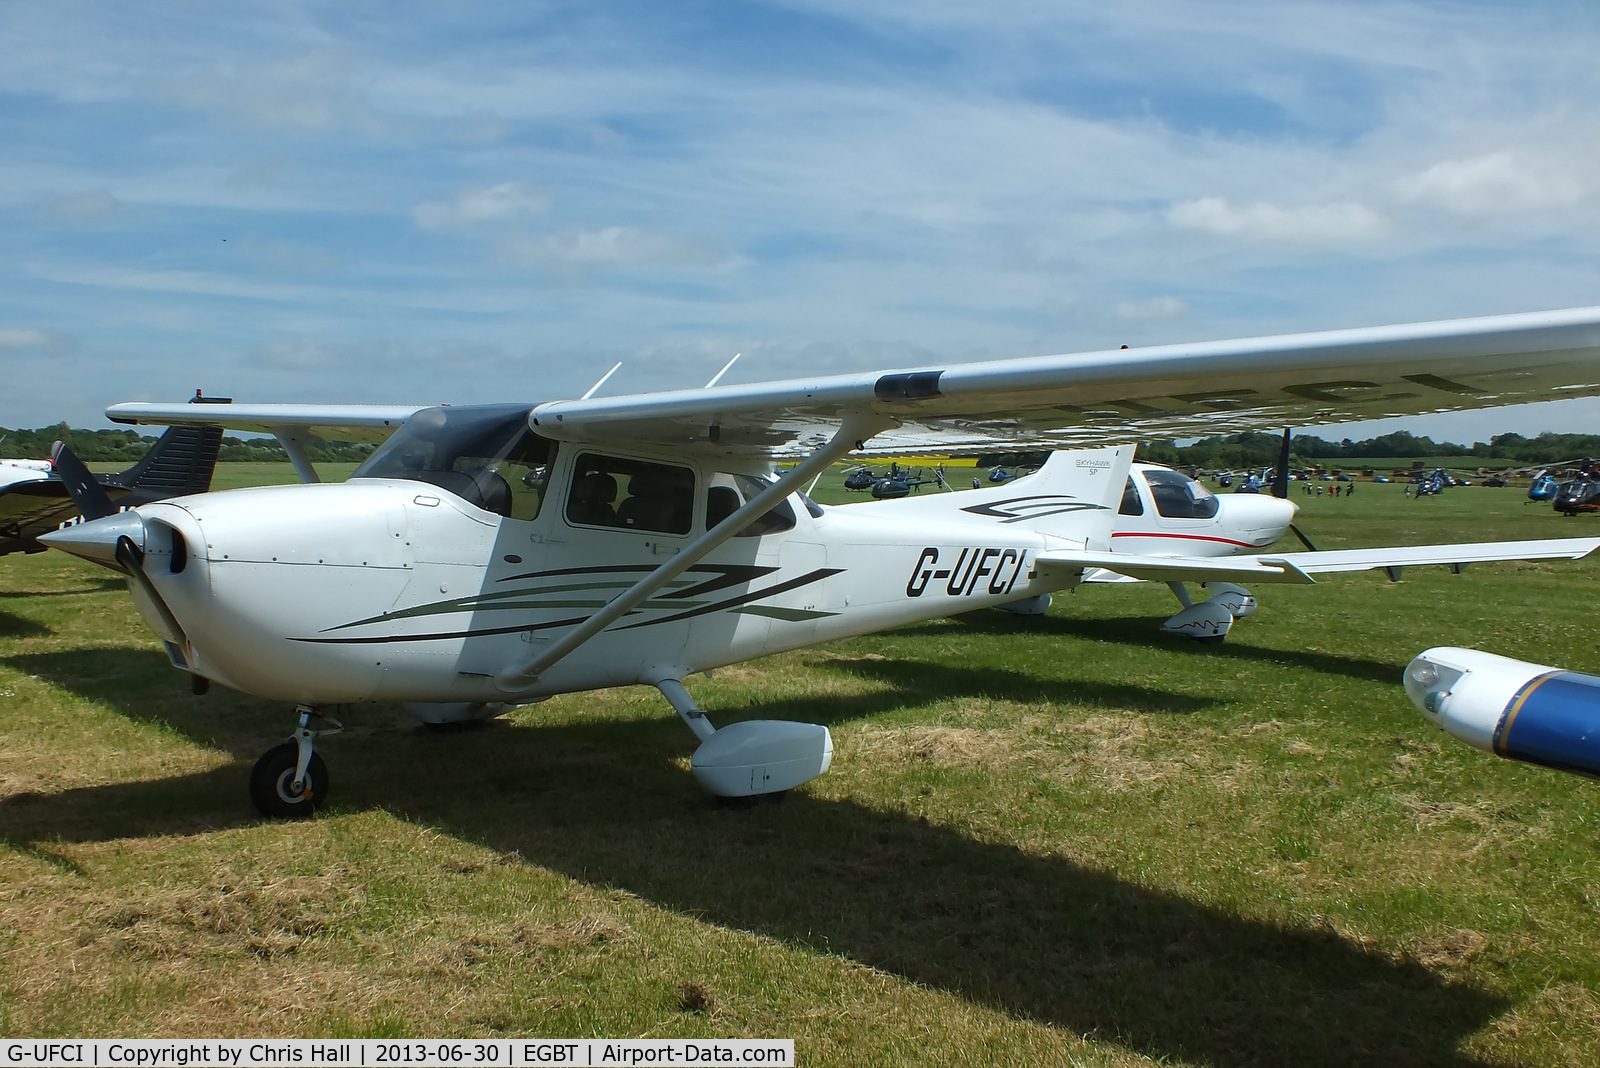 G-UFCI, 2007 Cessna 172S C/N 172S-10508, Visitor at Turweston for the British F1 Grand Prix at Silverstone